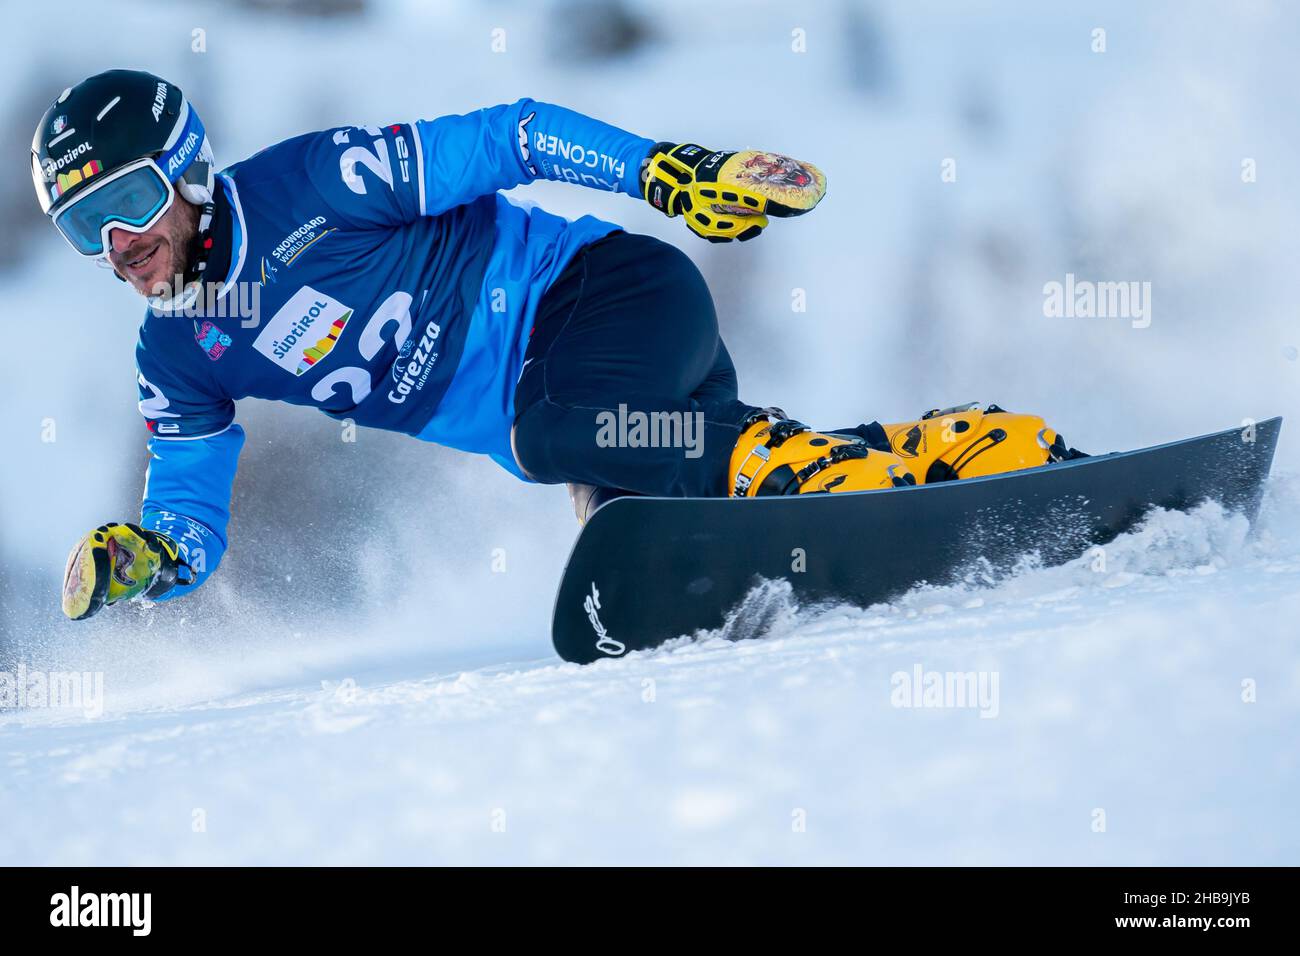 MARCH Aaron (ITA) competing in the Fis Snowboard World Cup 2022  Men's Parallel Giant Slalom on the Pra Di Tori (Carezza) Course in the dolomite mountain range Stock Photo